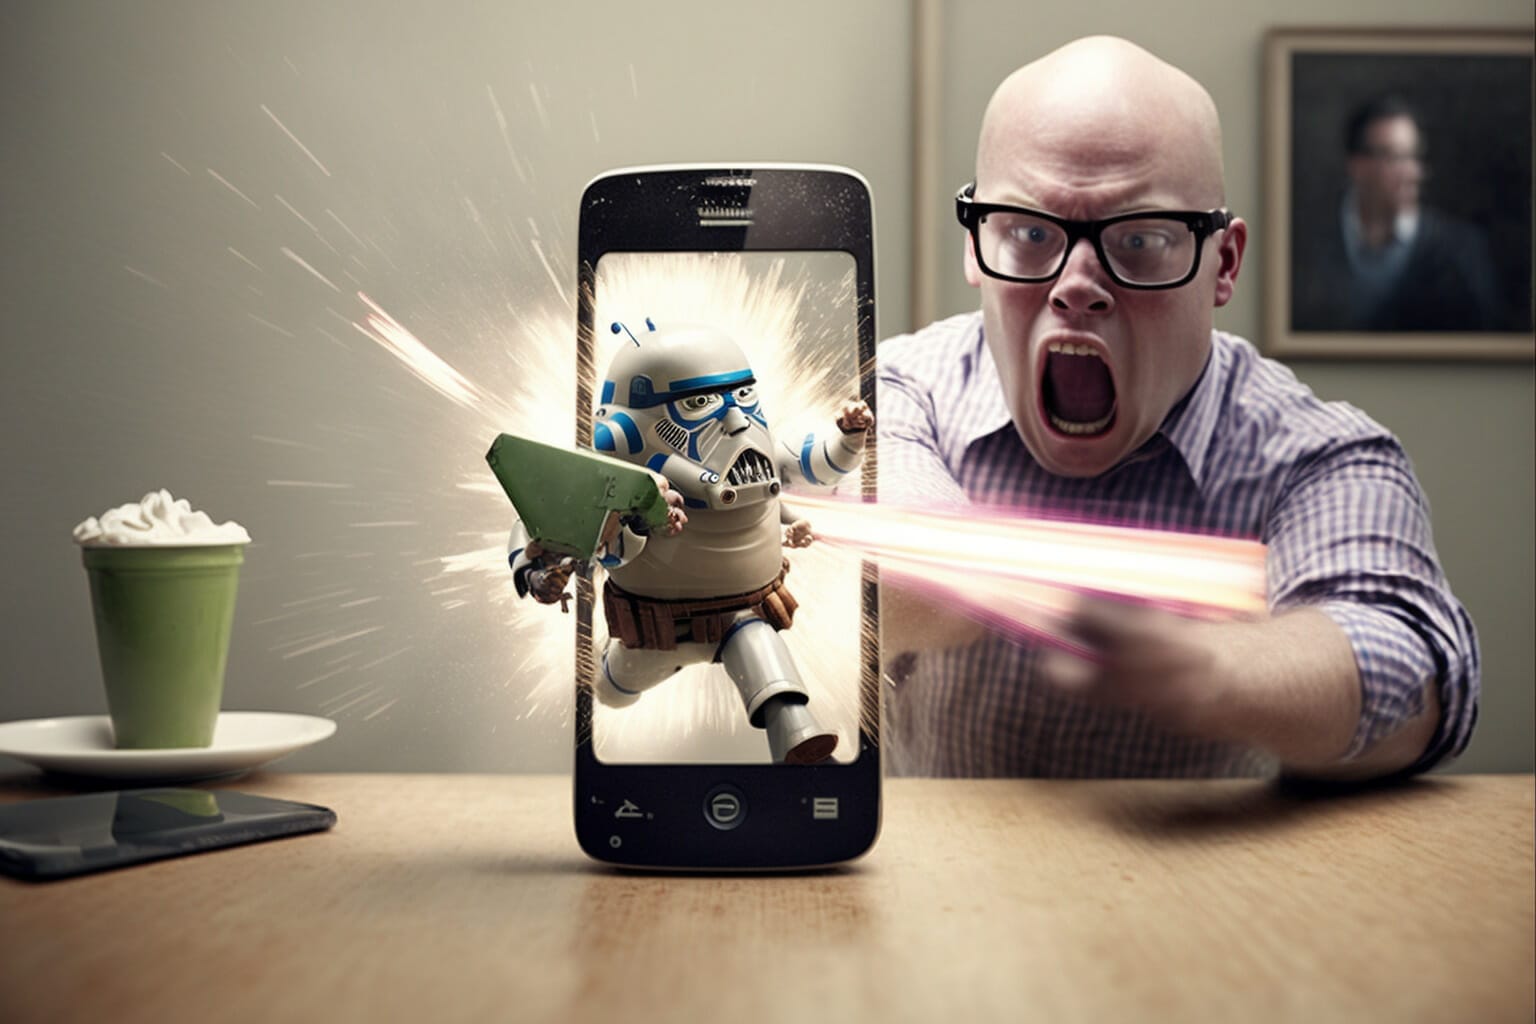 Angry man in smartphone laser gun fight